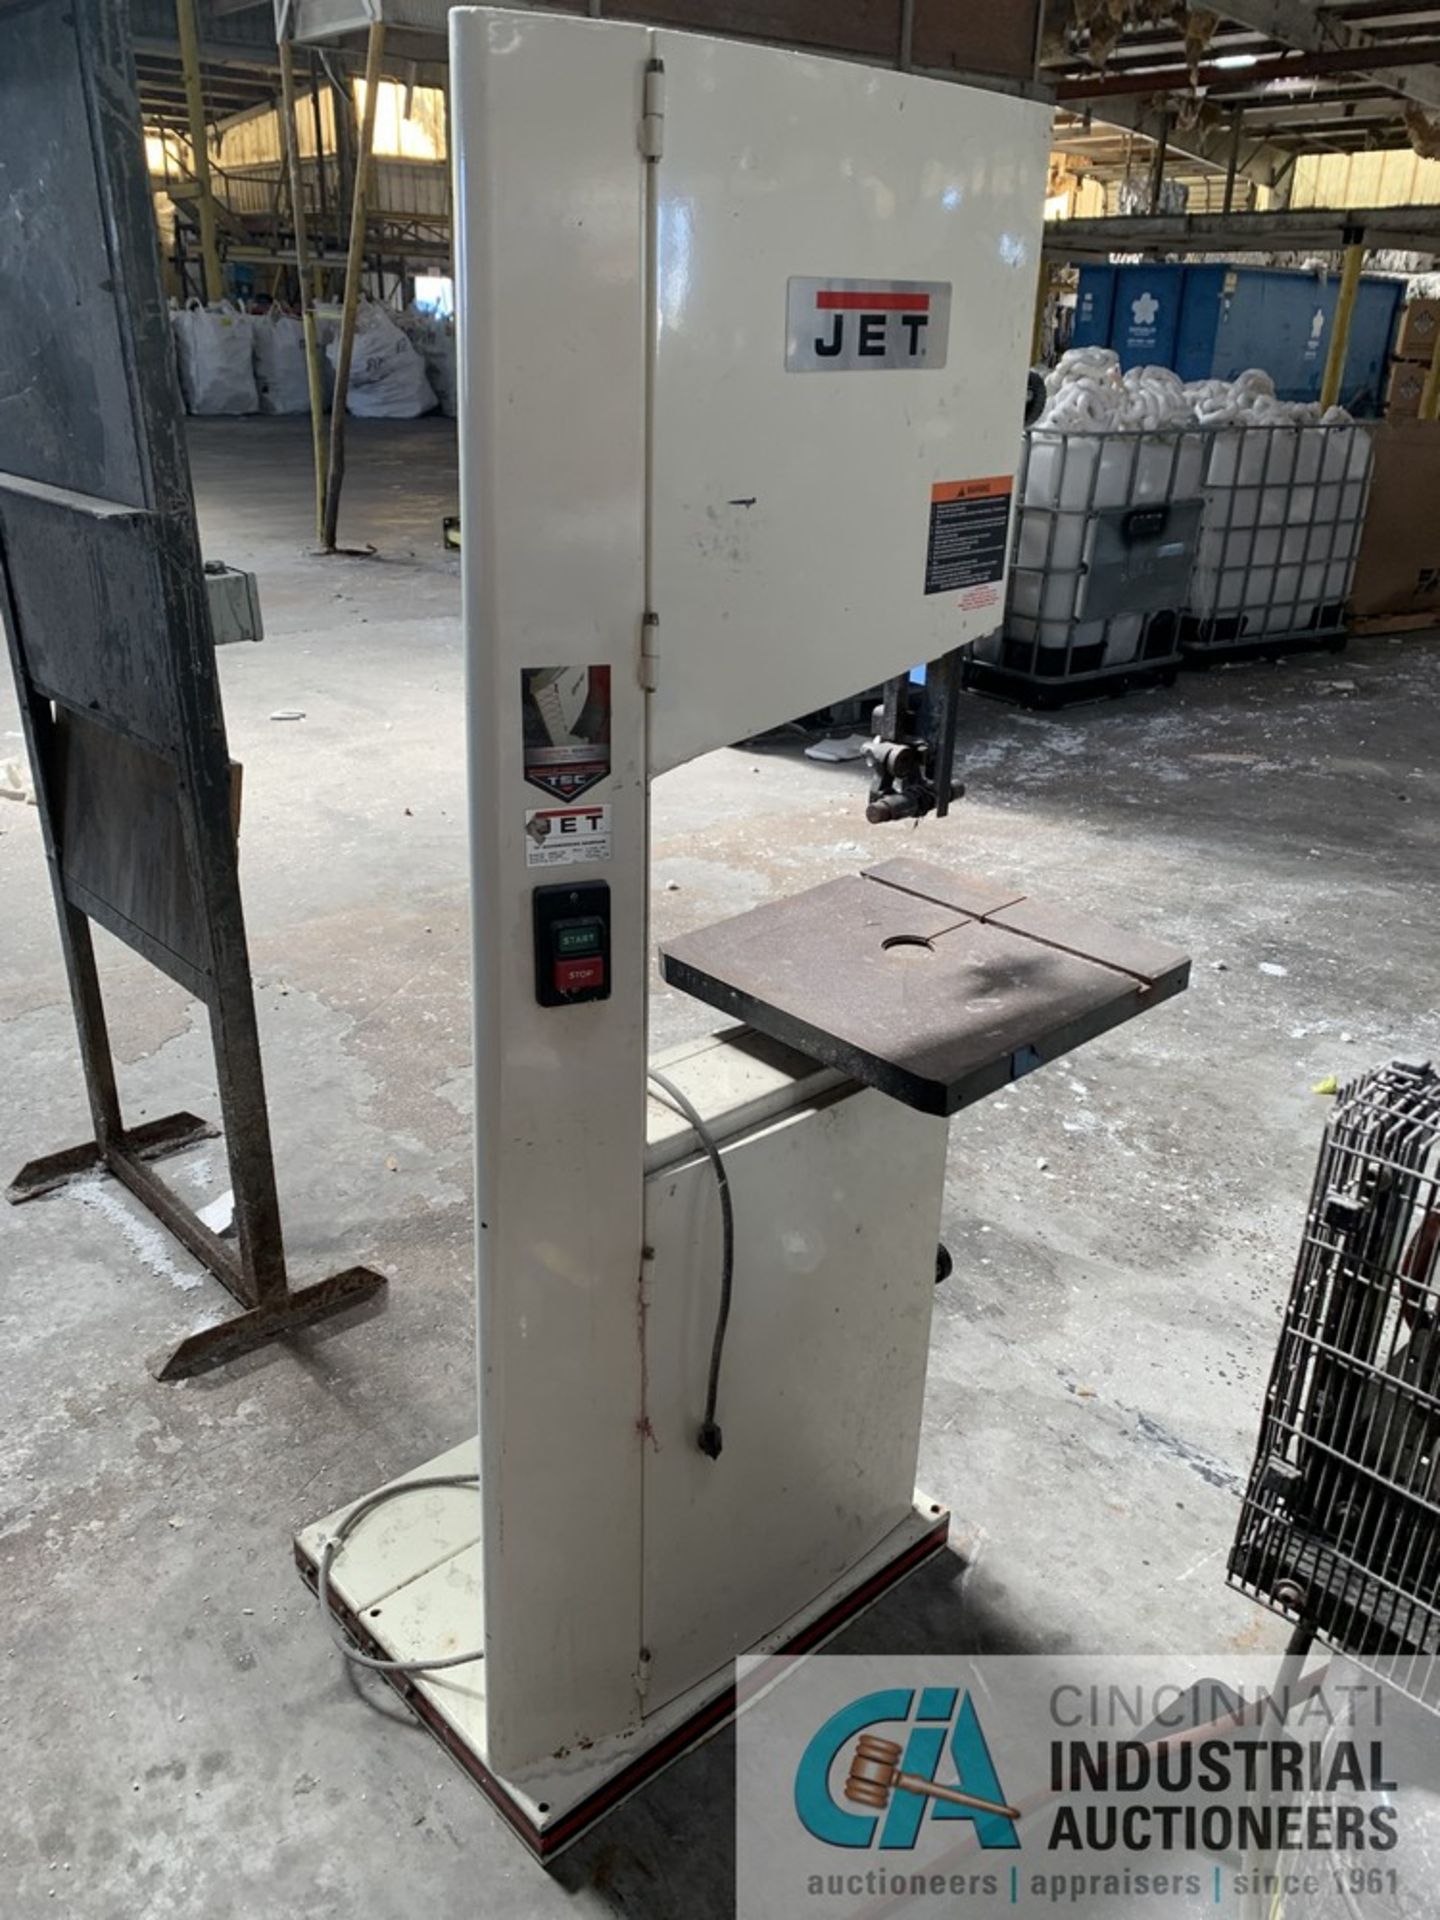 16" JET MODEL JWBS-16B WOODWORKING VERTICAL BAND SAW; S/N 1405771, 1.5 HP MOTOR - Image 2 of 5